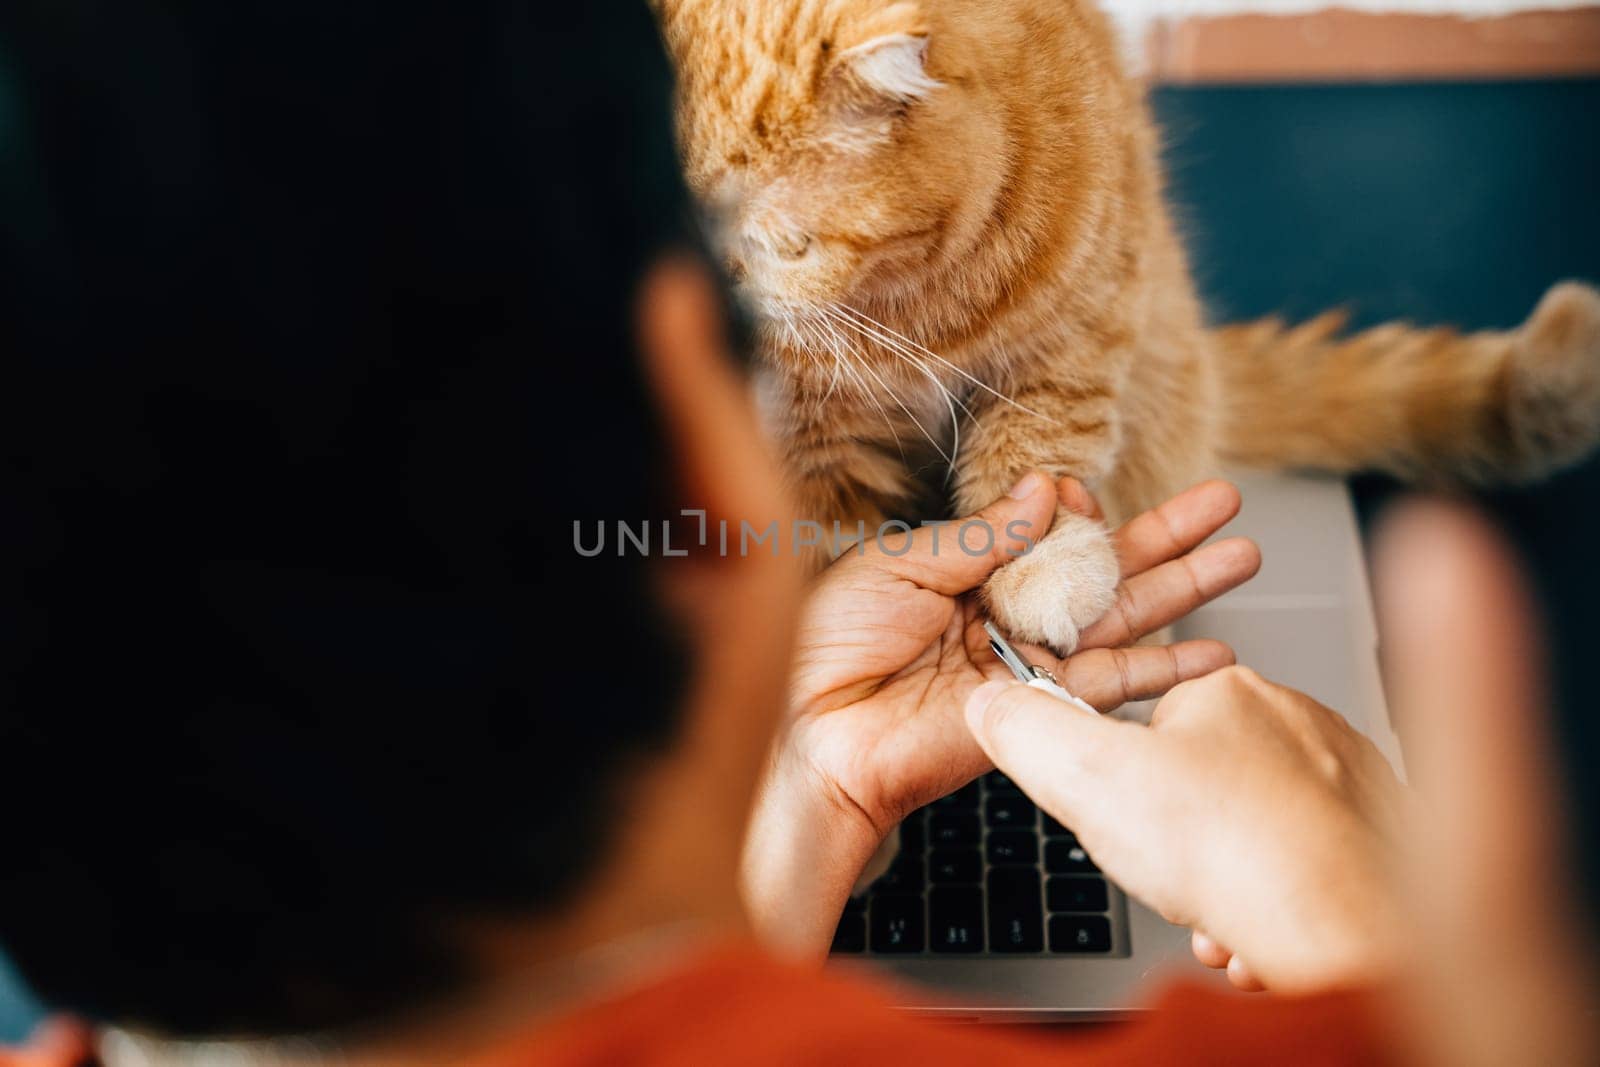 Veterinary nurse trims nails of Scottish Fold cat, while girl takes care of orange cat claws in close-up. highlights the importance of proper cat nail care and showcases expertise in action. by Sorapop